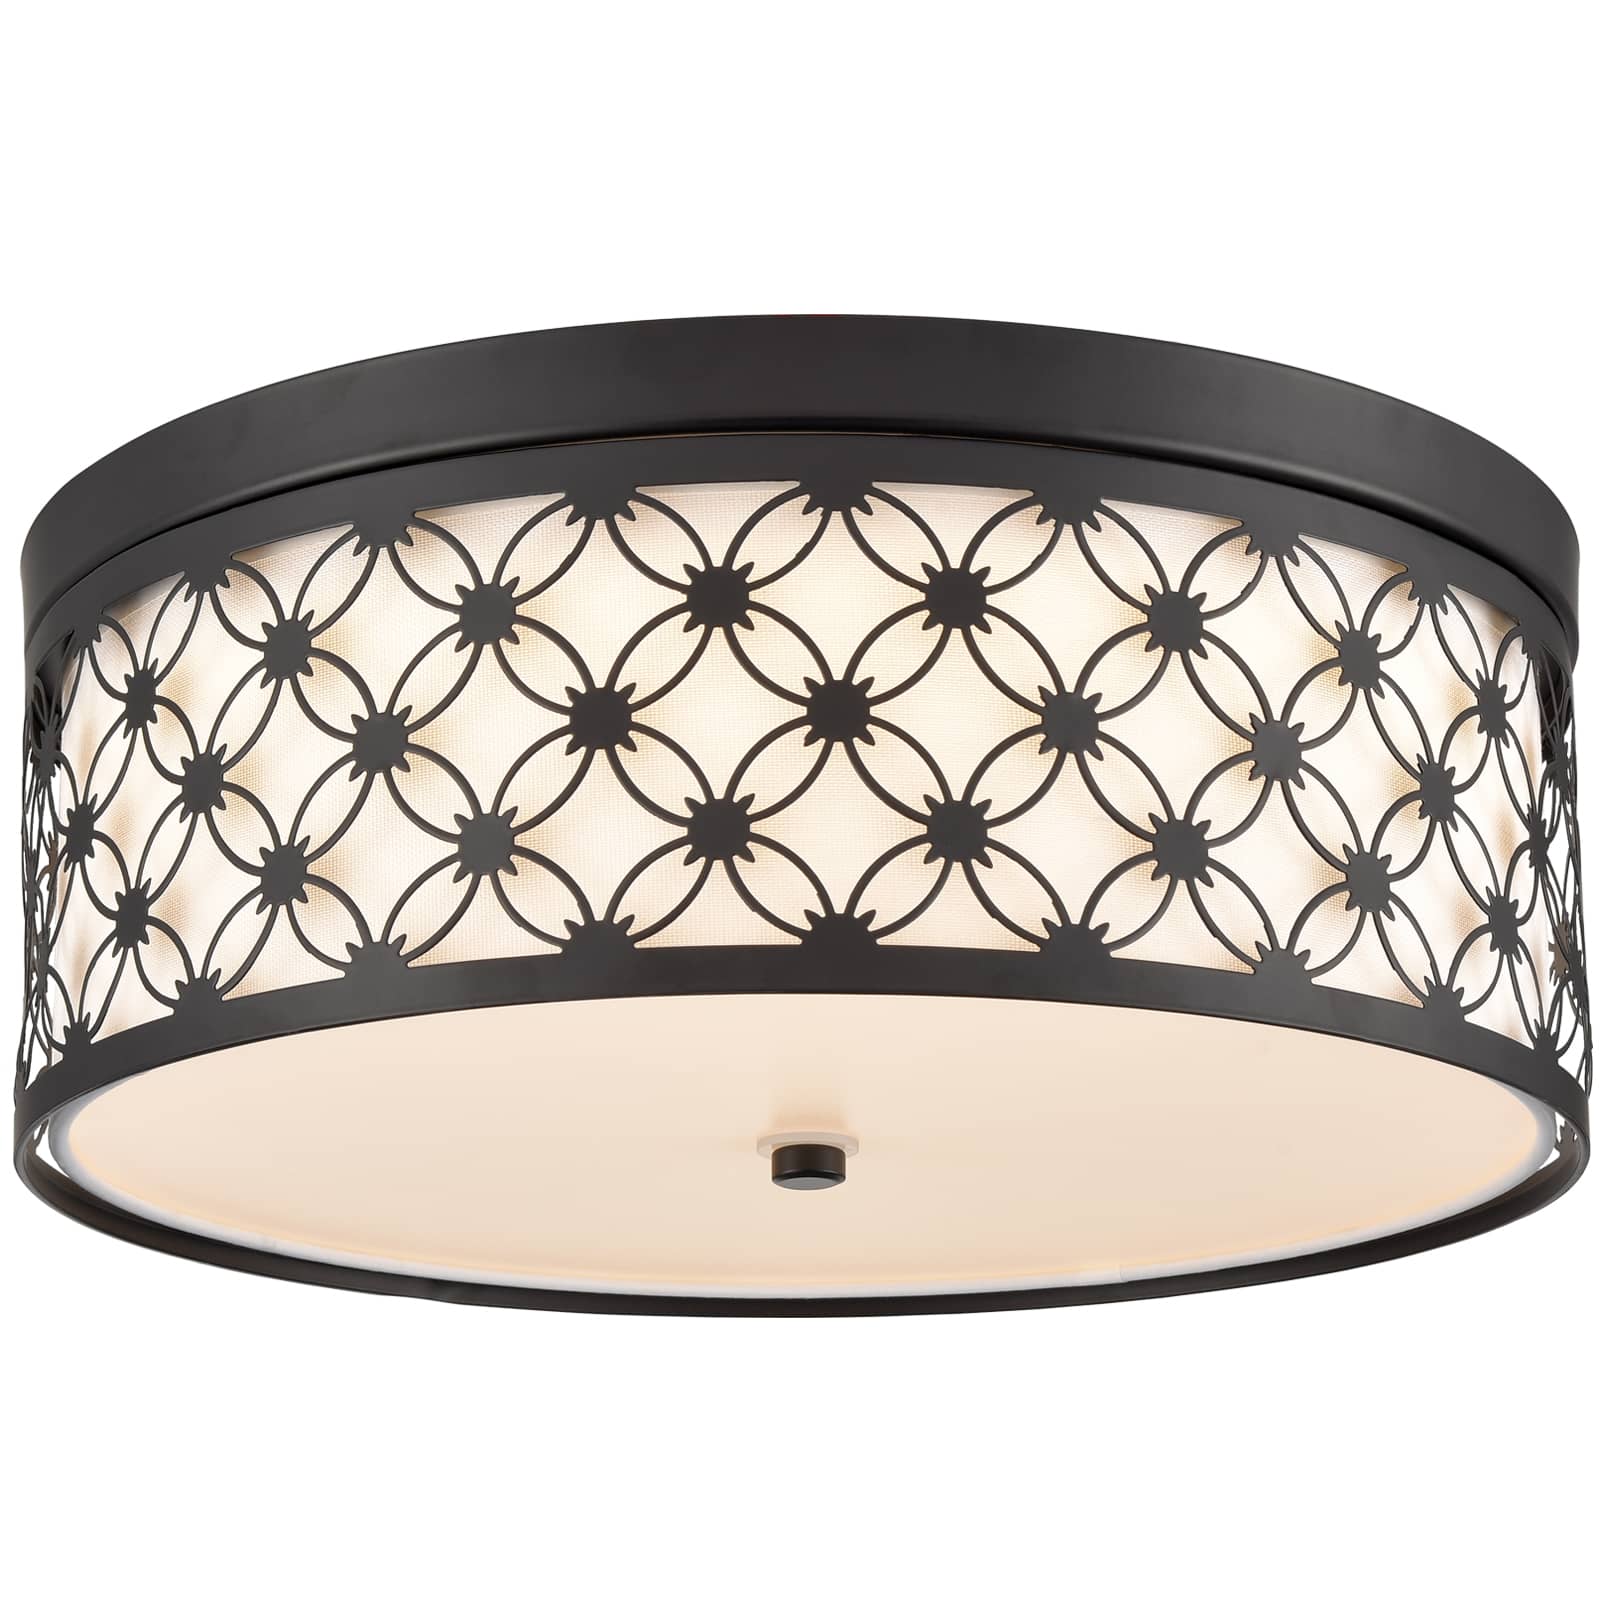 Modern 15'' Round Drum Shade Black Metal Dimmable LED Ceiling Light Hallway Light Fixtures